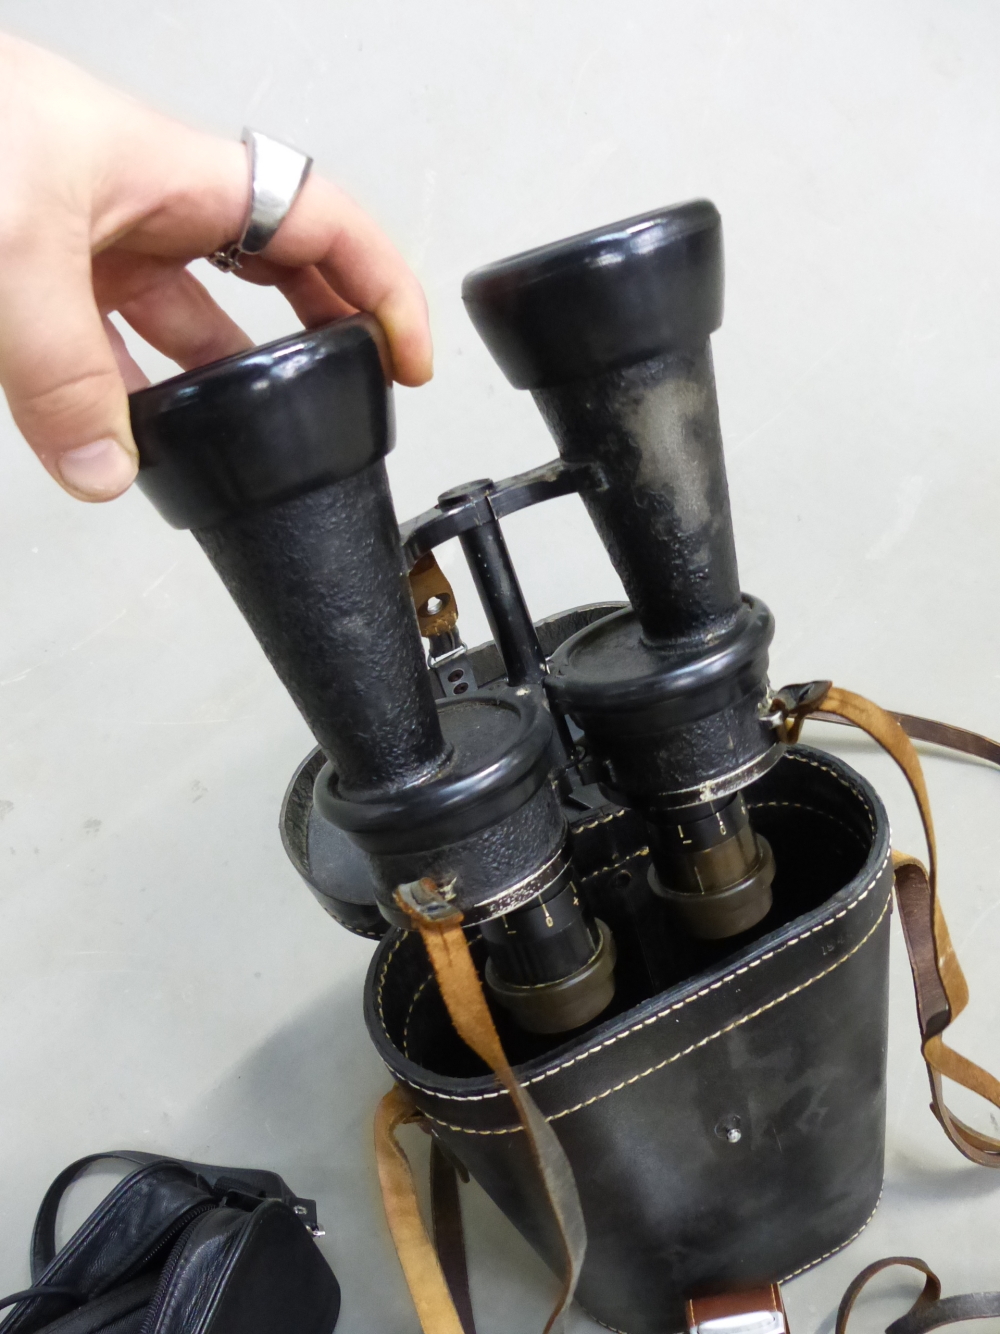 A PAIR OF VINTAGE 7 x 50 BINOCULARS MARKED "BEH" No.453533 (CASED), TOGETHER WITH A PAIR OF - Image 6 of 7